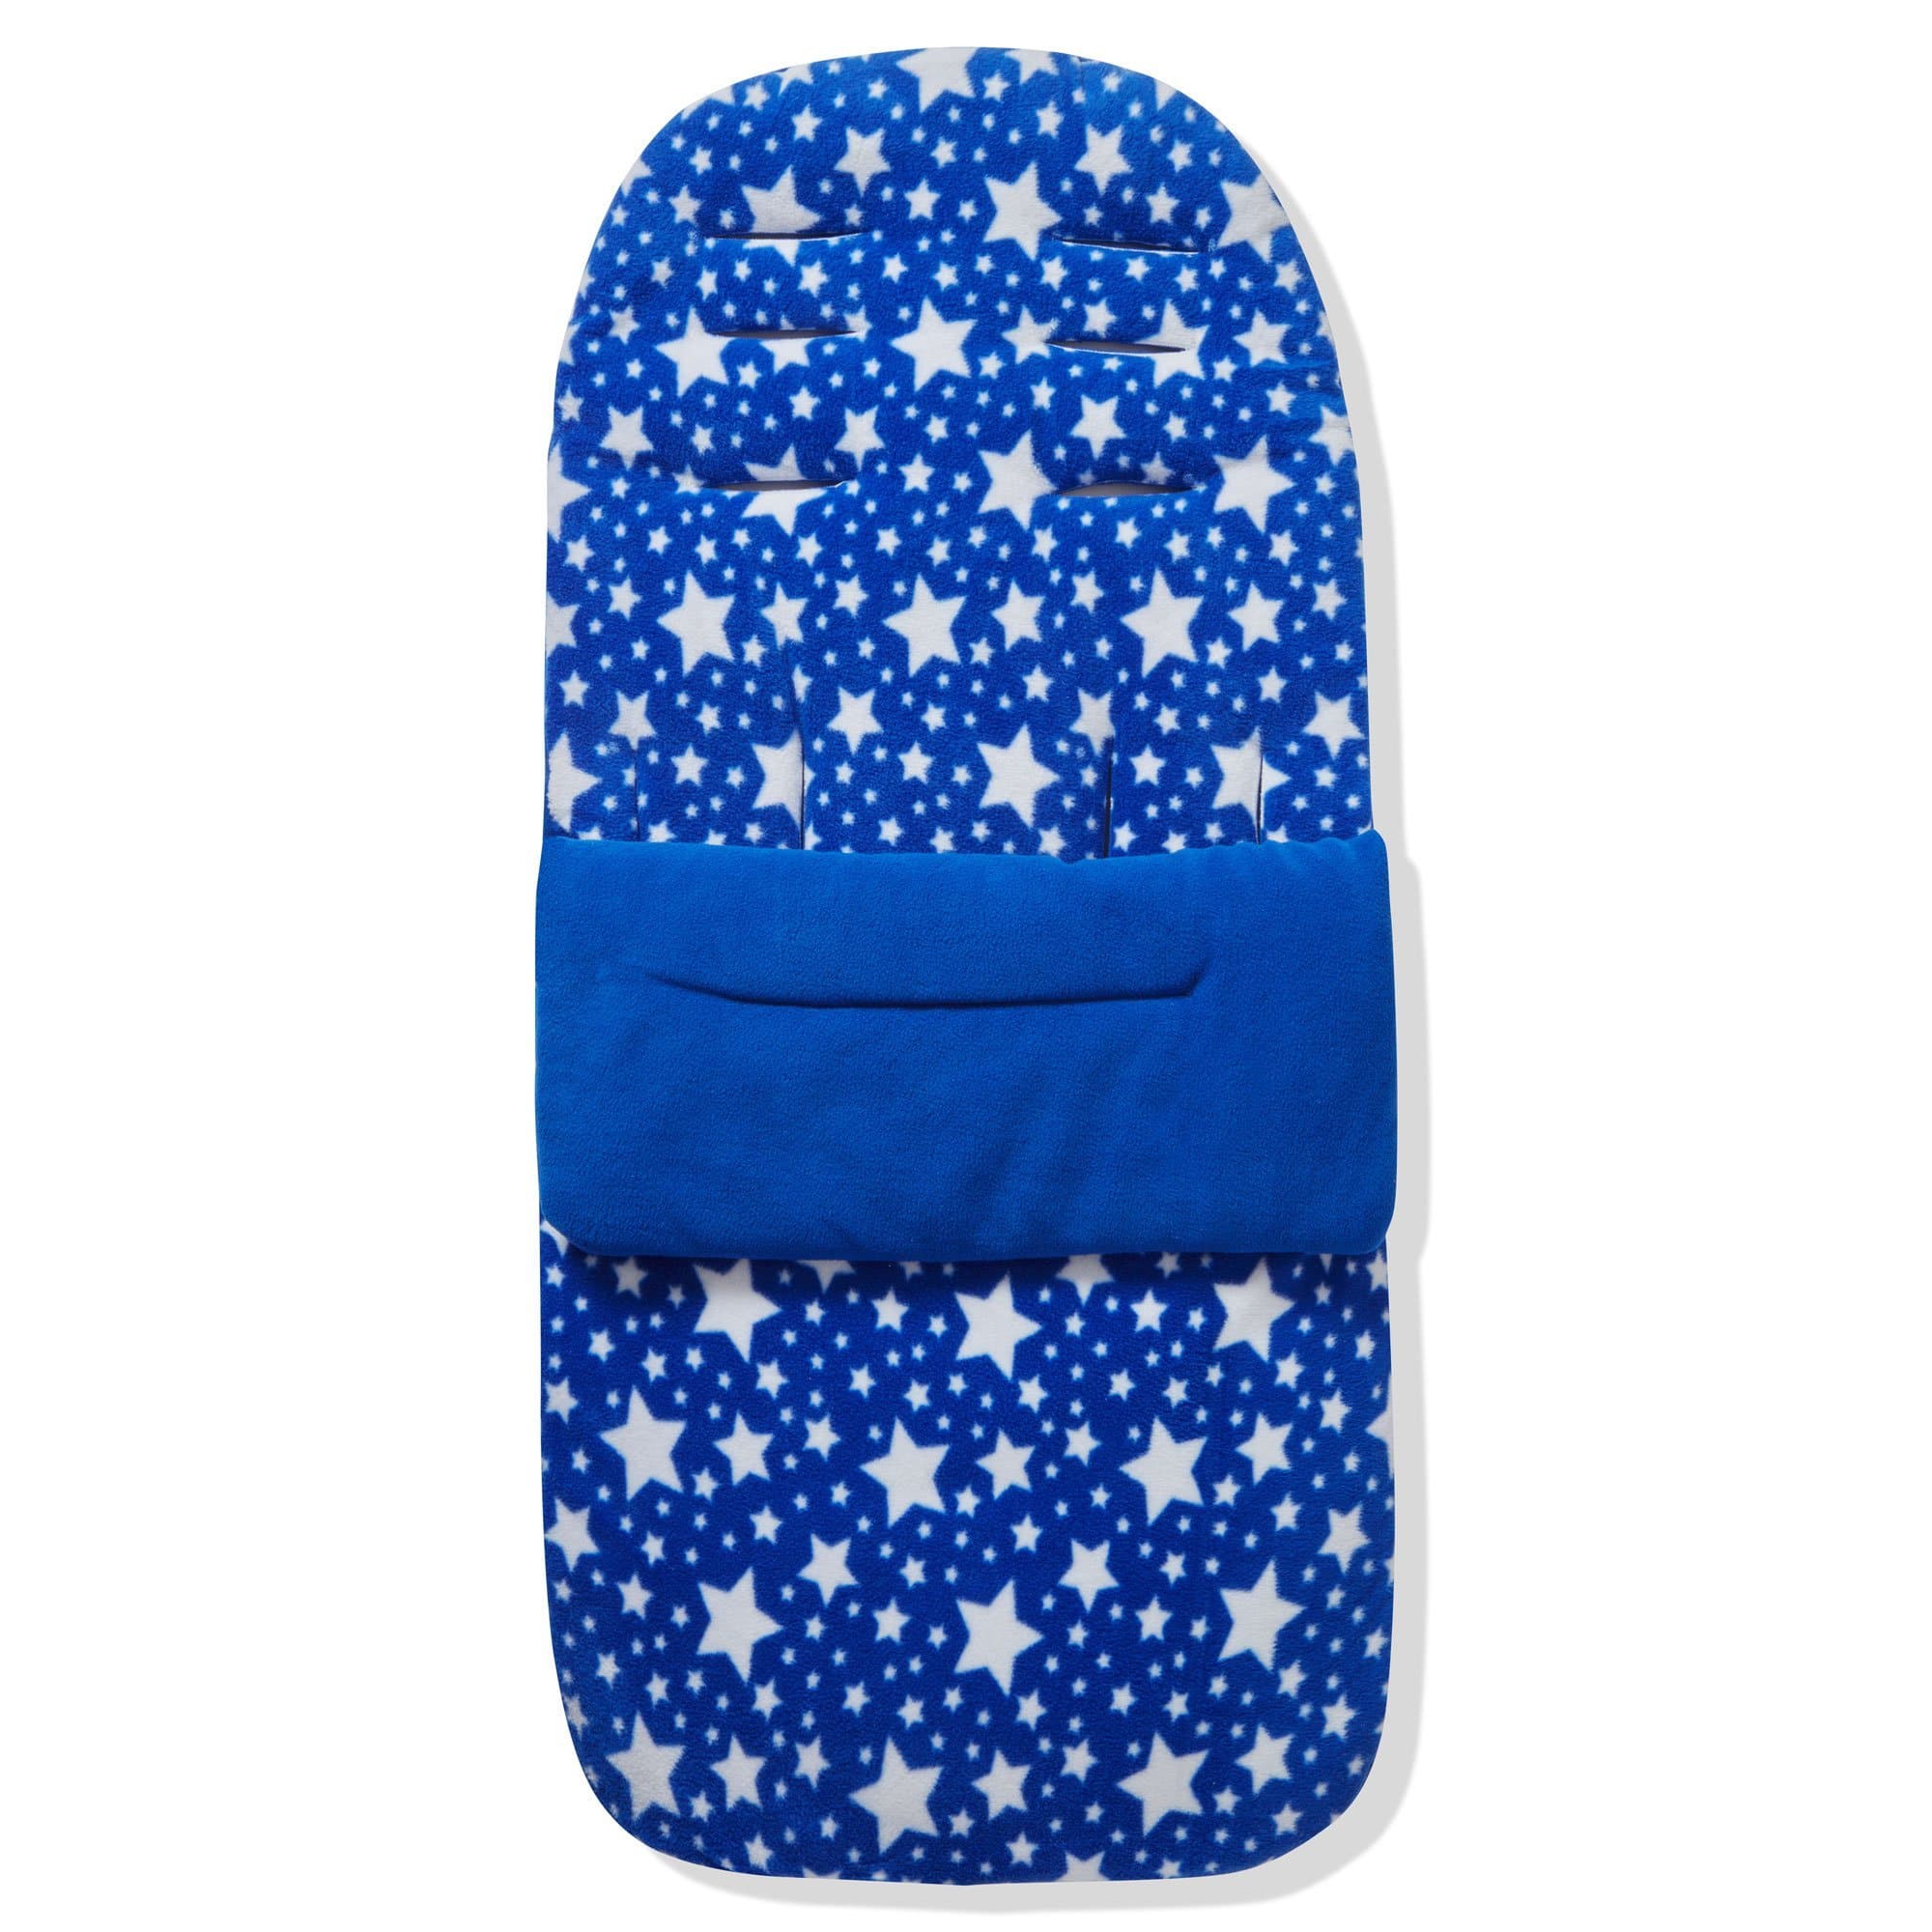 Fleece Footmuff / Cosy Toes Compatible With Brio - Blue Star / Fits All Models | For Your Little One